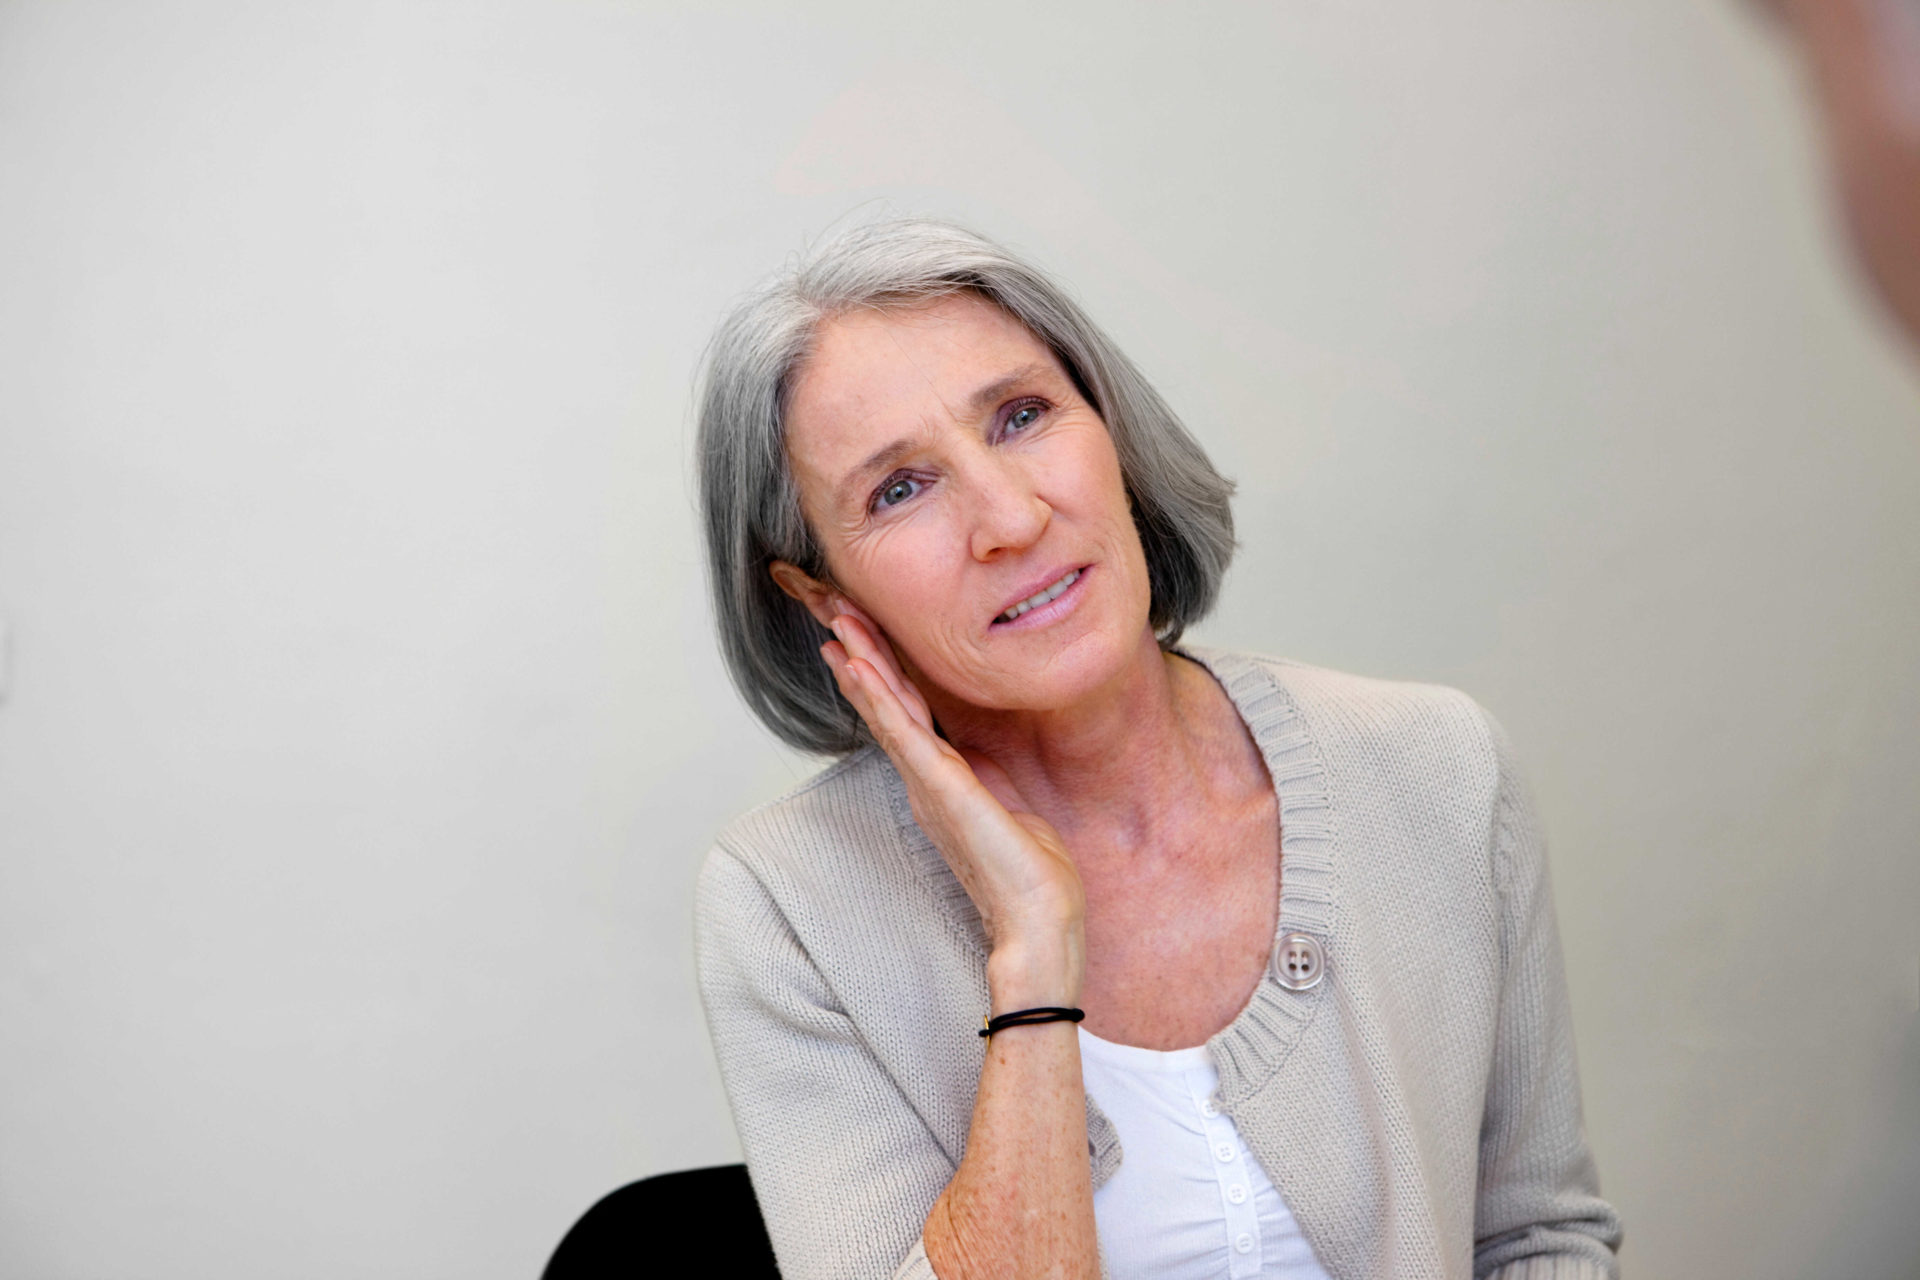 woman struggling to listen through one of her ears 